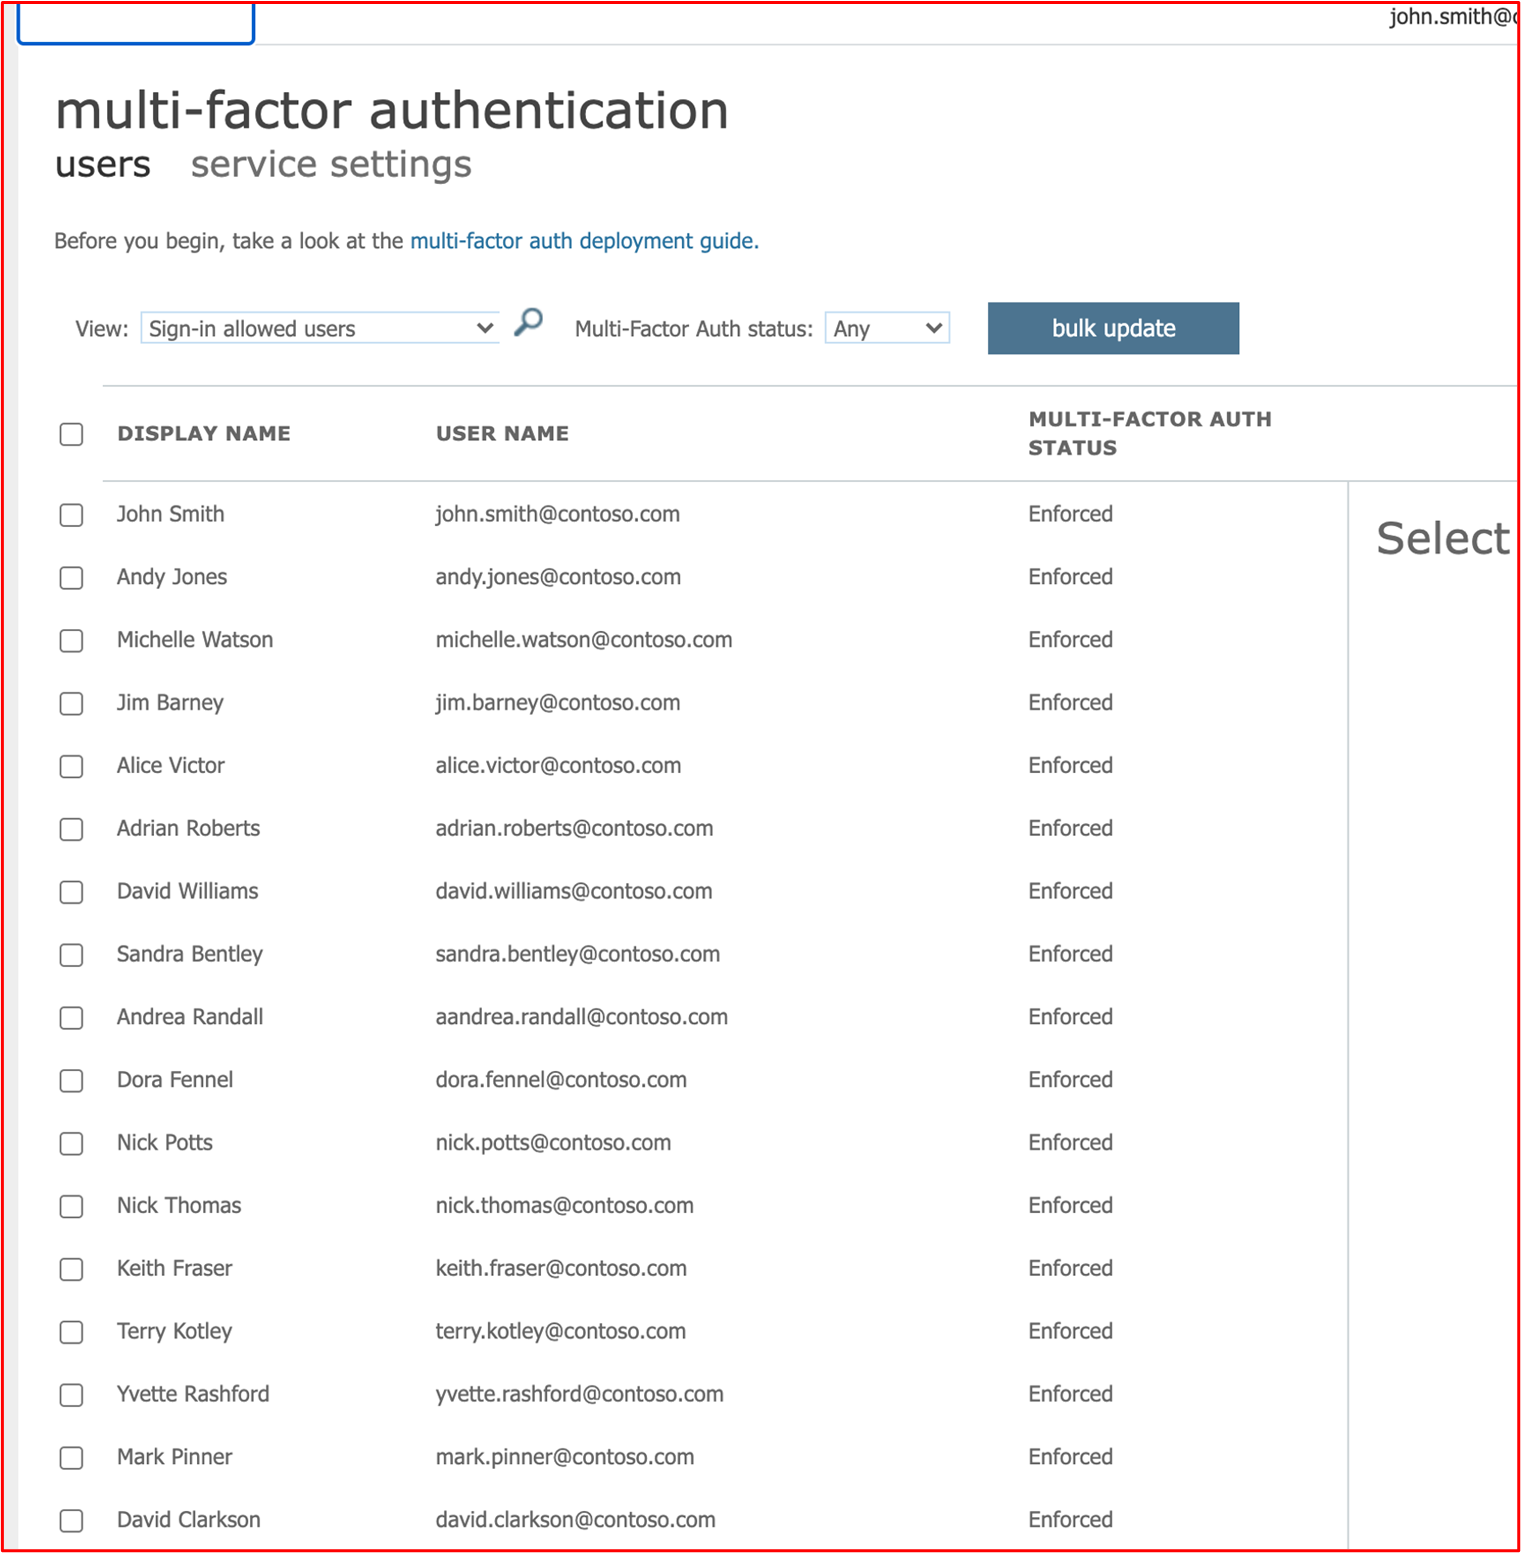 show that all Azure users have MFA enabled.